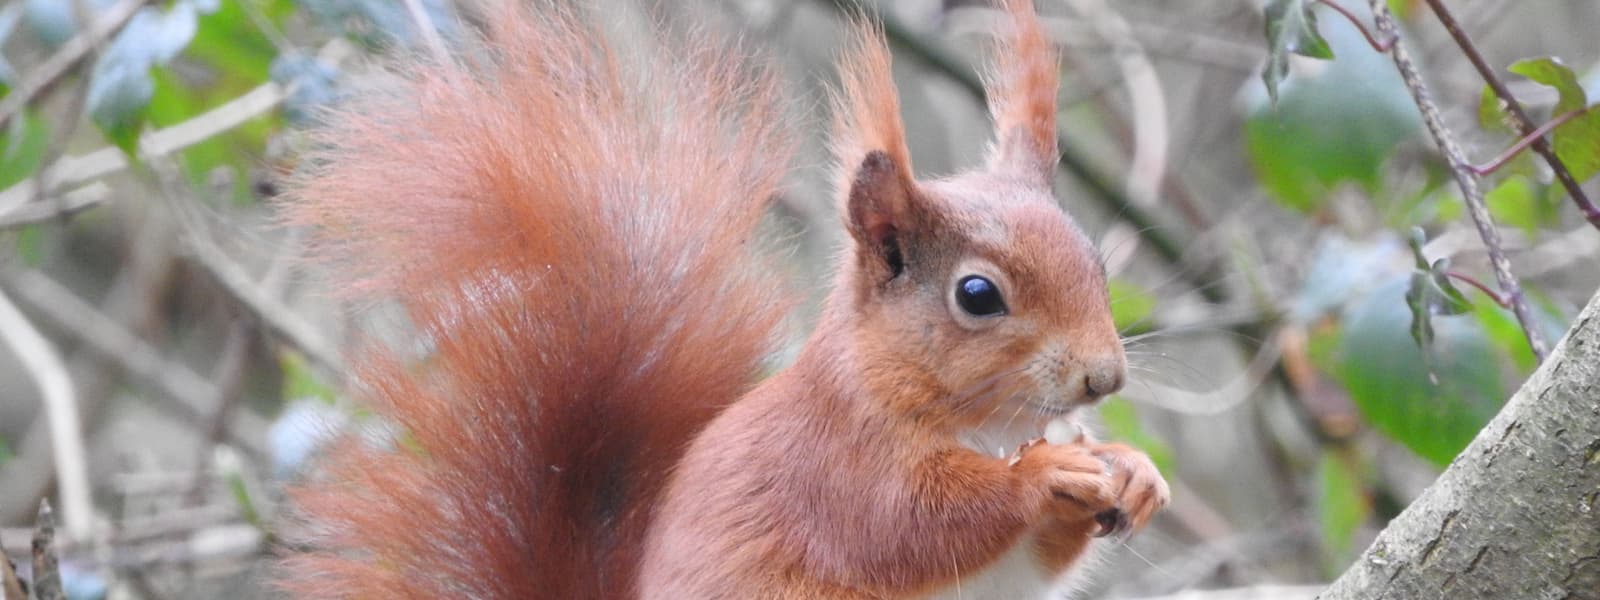 Anglesey NL - Wiwer Goch Red Squirrel (c) Ray Ewing